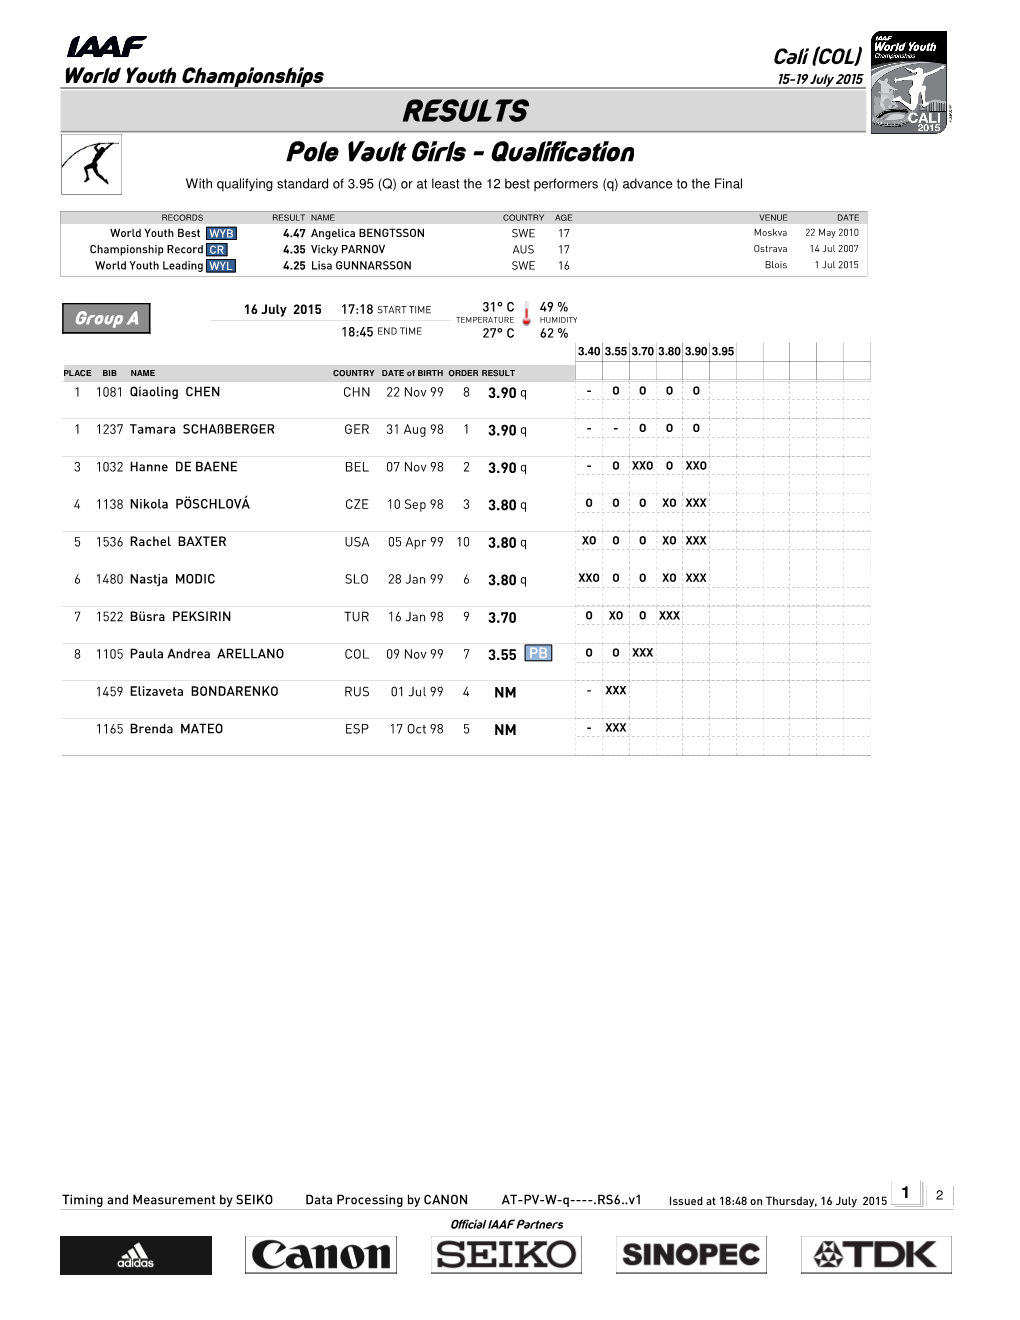 RESULTS Pole Vault Girls - Qualification with Qualifying Standard of 3.95 (Q) Or at Least the 12 Best Performers (Q) Advance to the Final